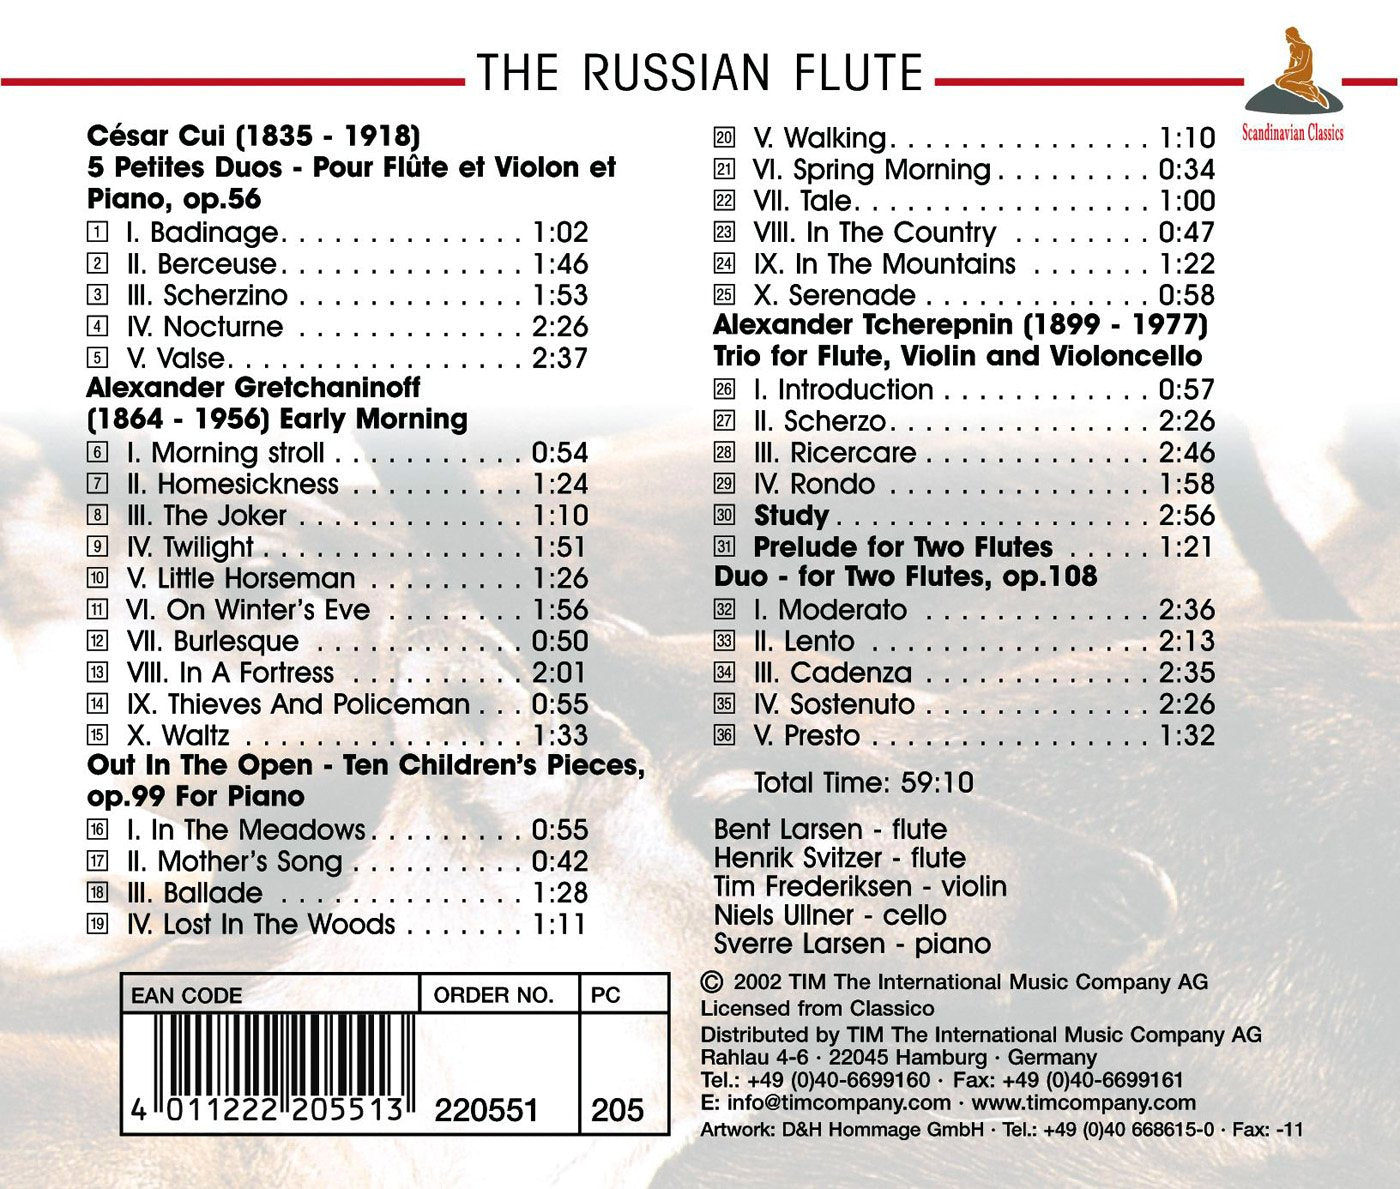 THE RUSSIAN FLUTE: WORKS by GRETCHANINOFF, TCHEREPNIN,  CUI